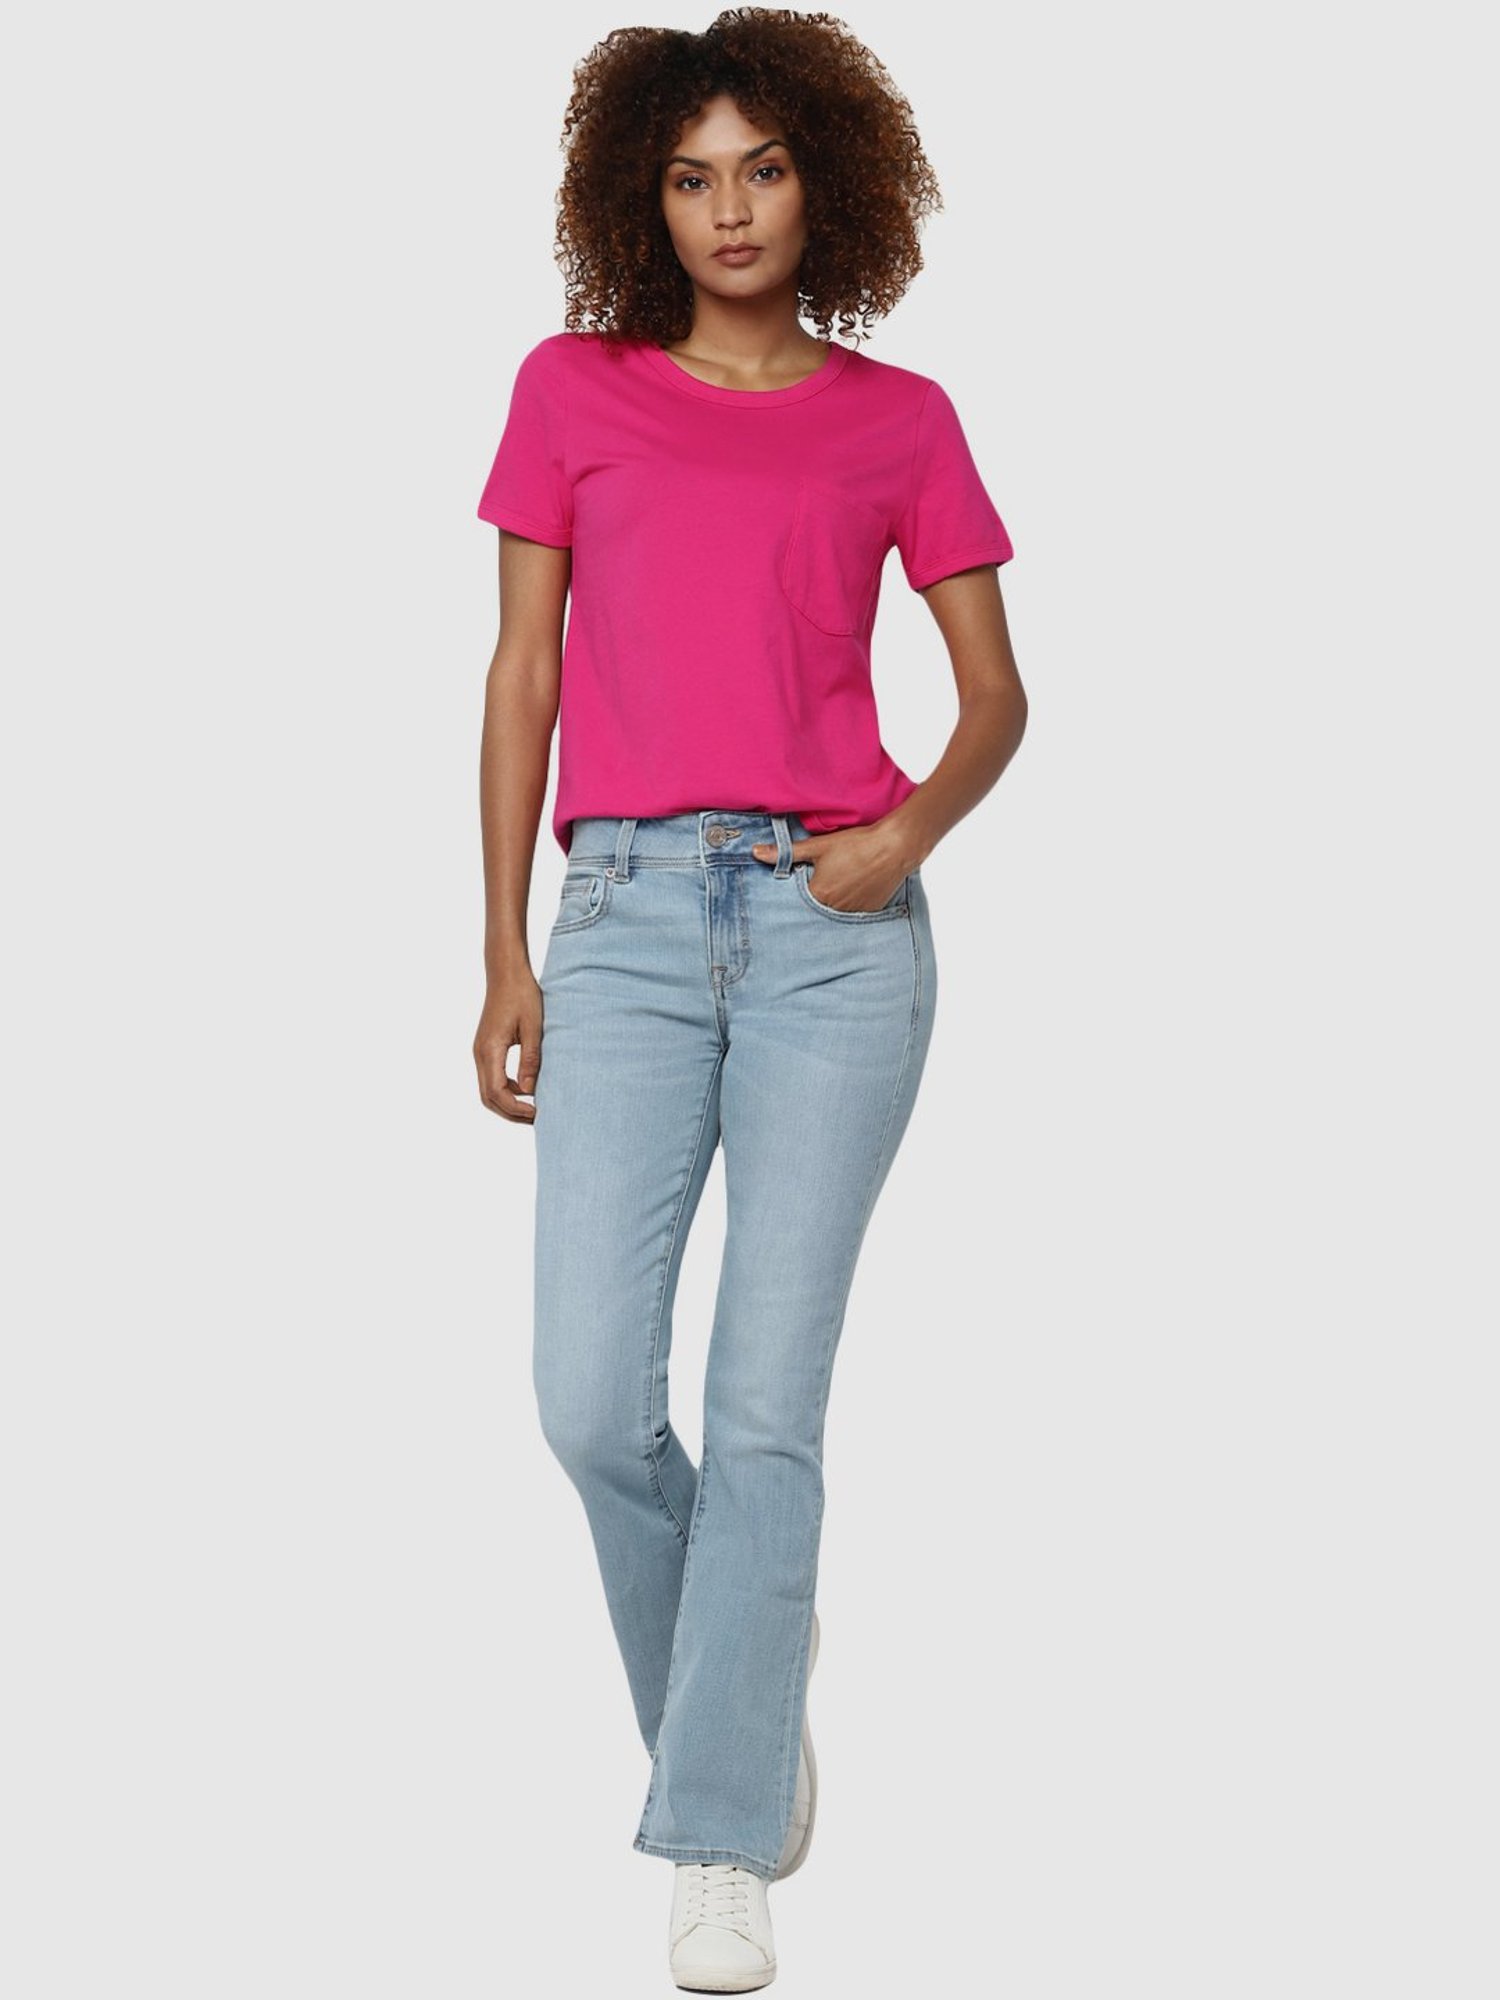 American Eagle Outfitters Pink Cotton Parachute Pants